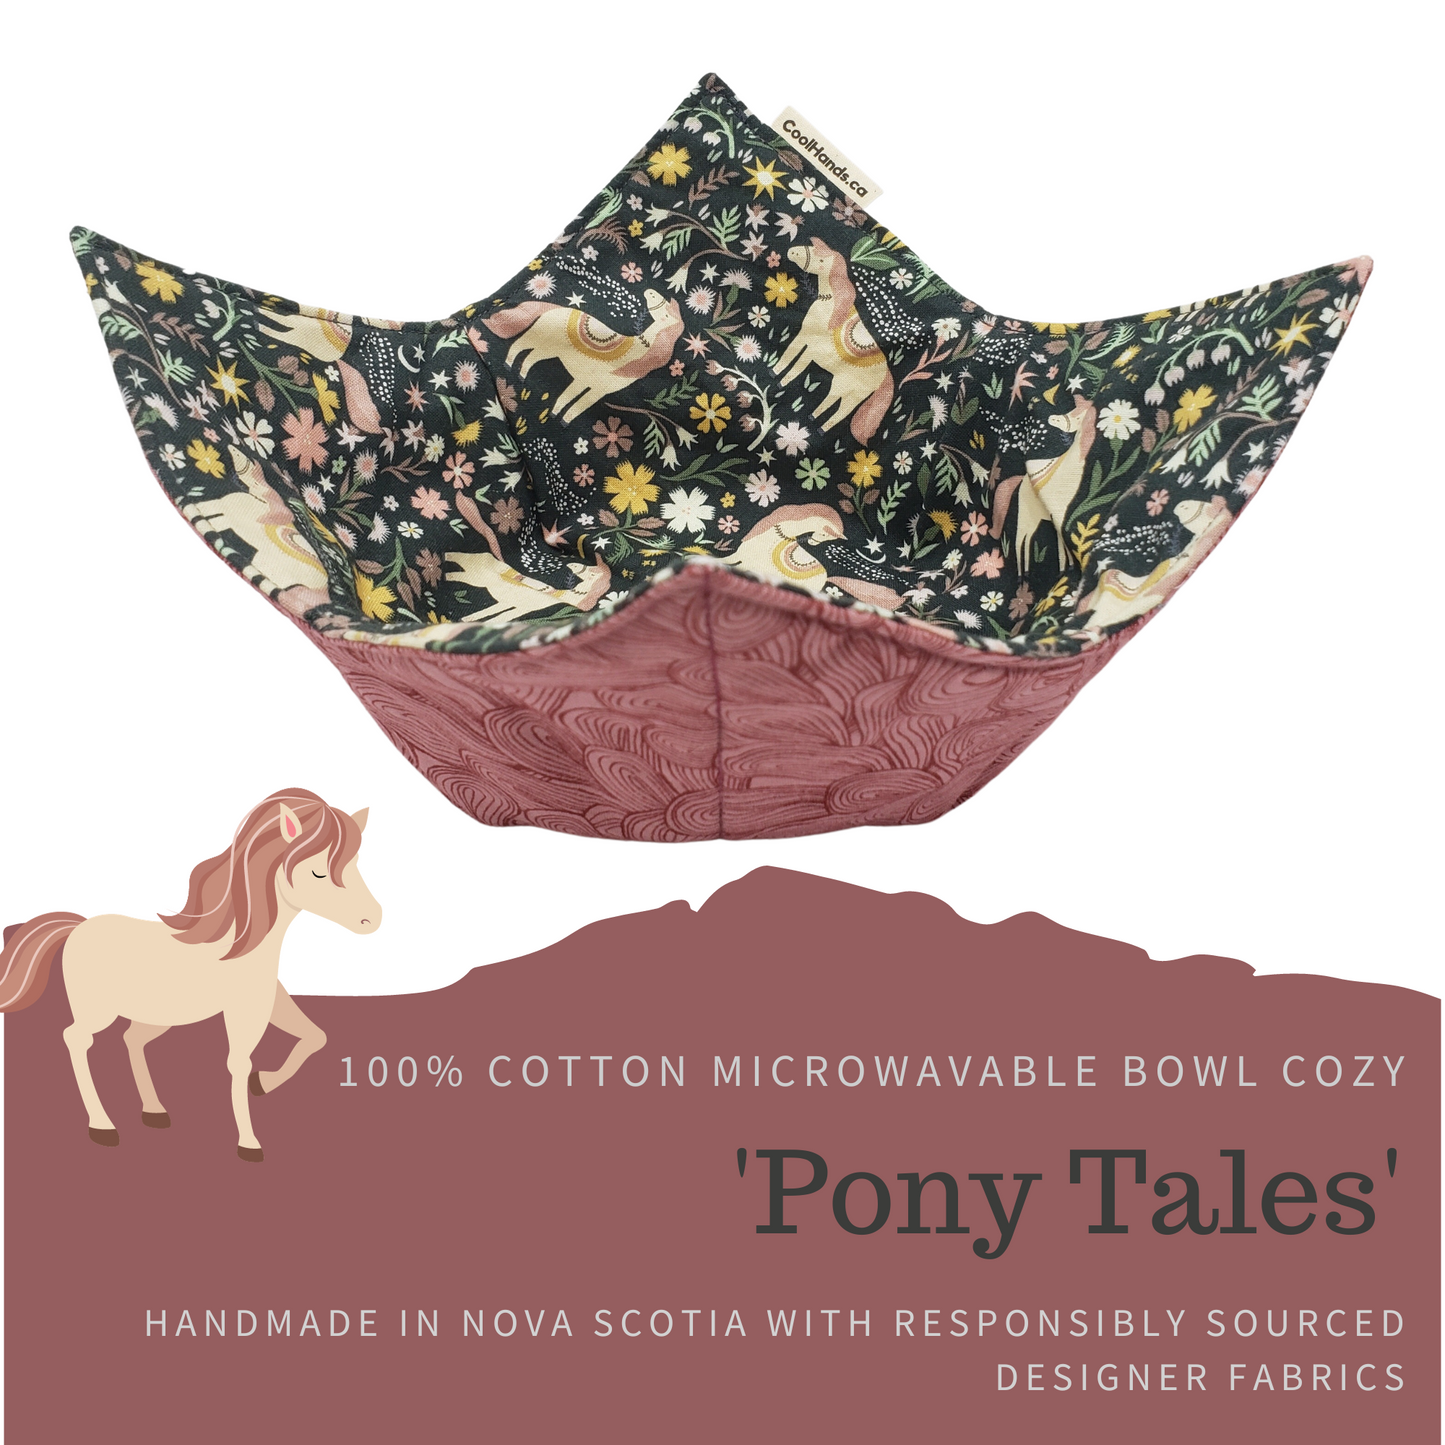 100% Cotton Microwavable Bowl Cozy - Pony Tales